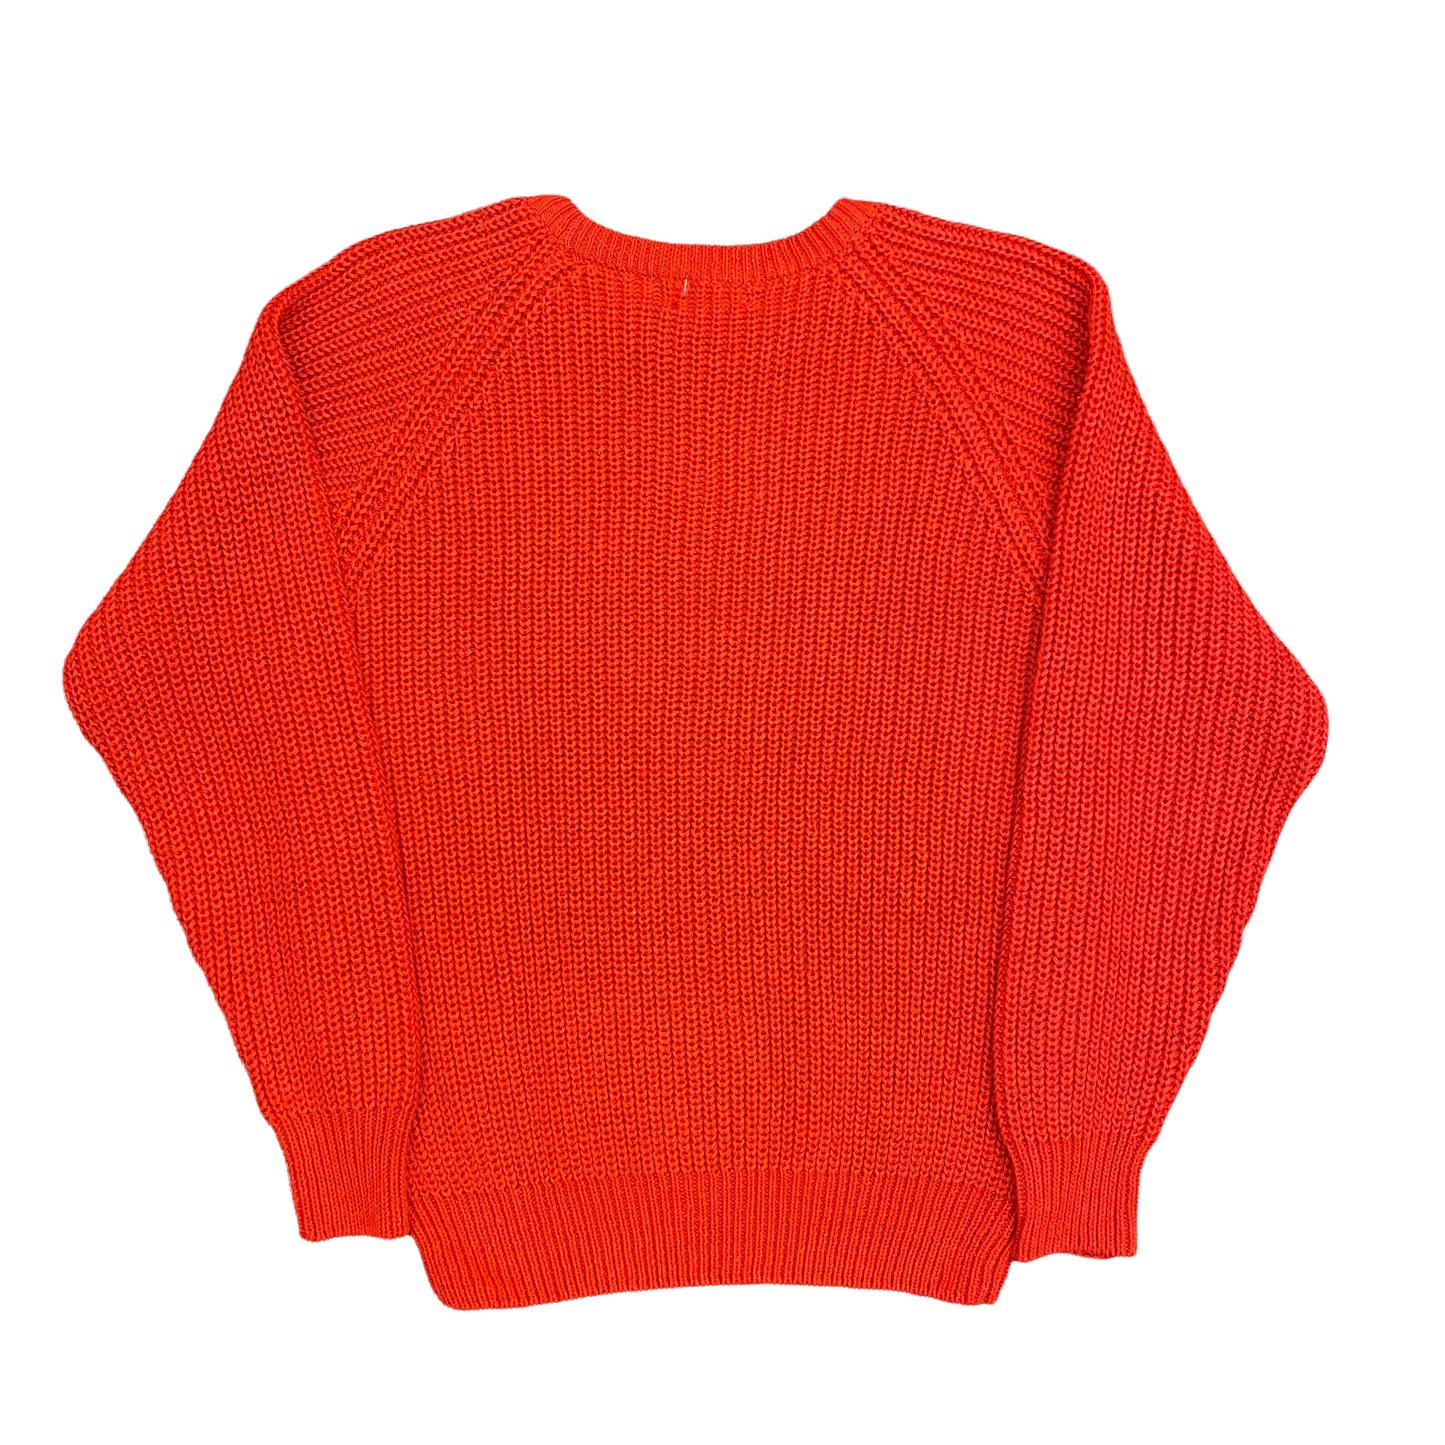 Vintage Gerard Works! Red Knit Sweater - Size Small